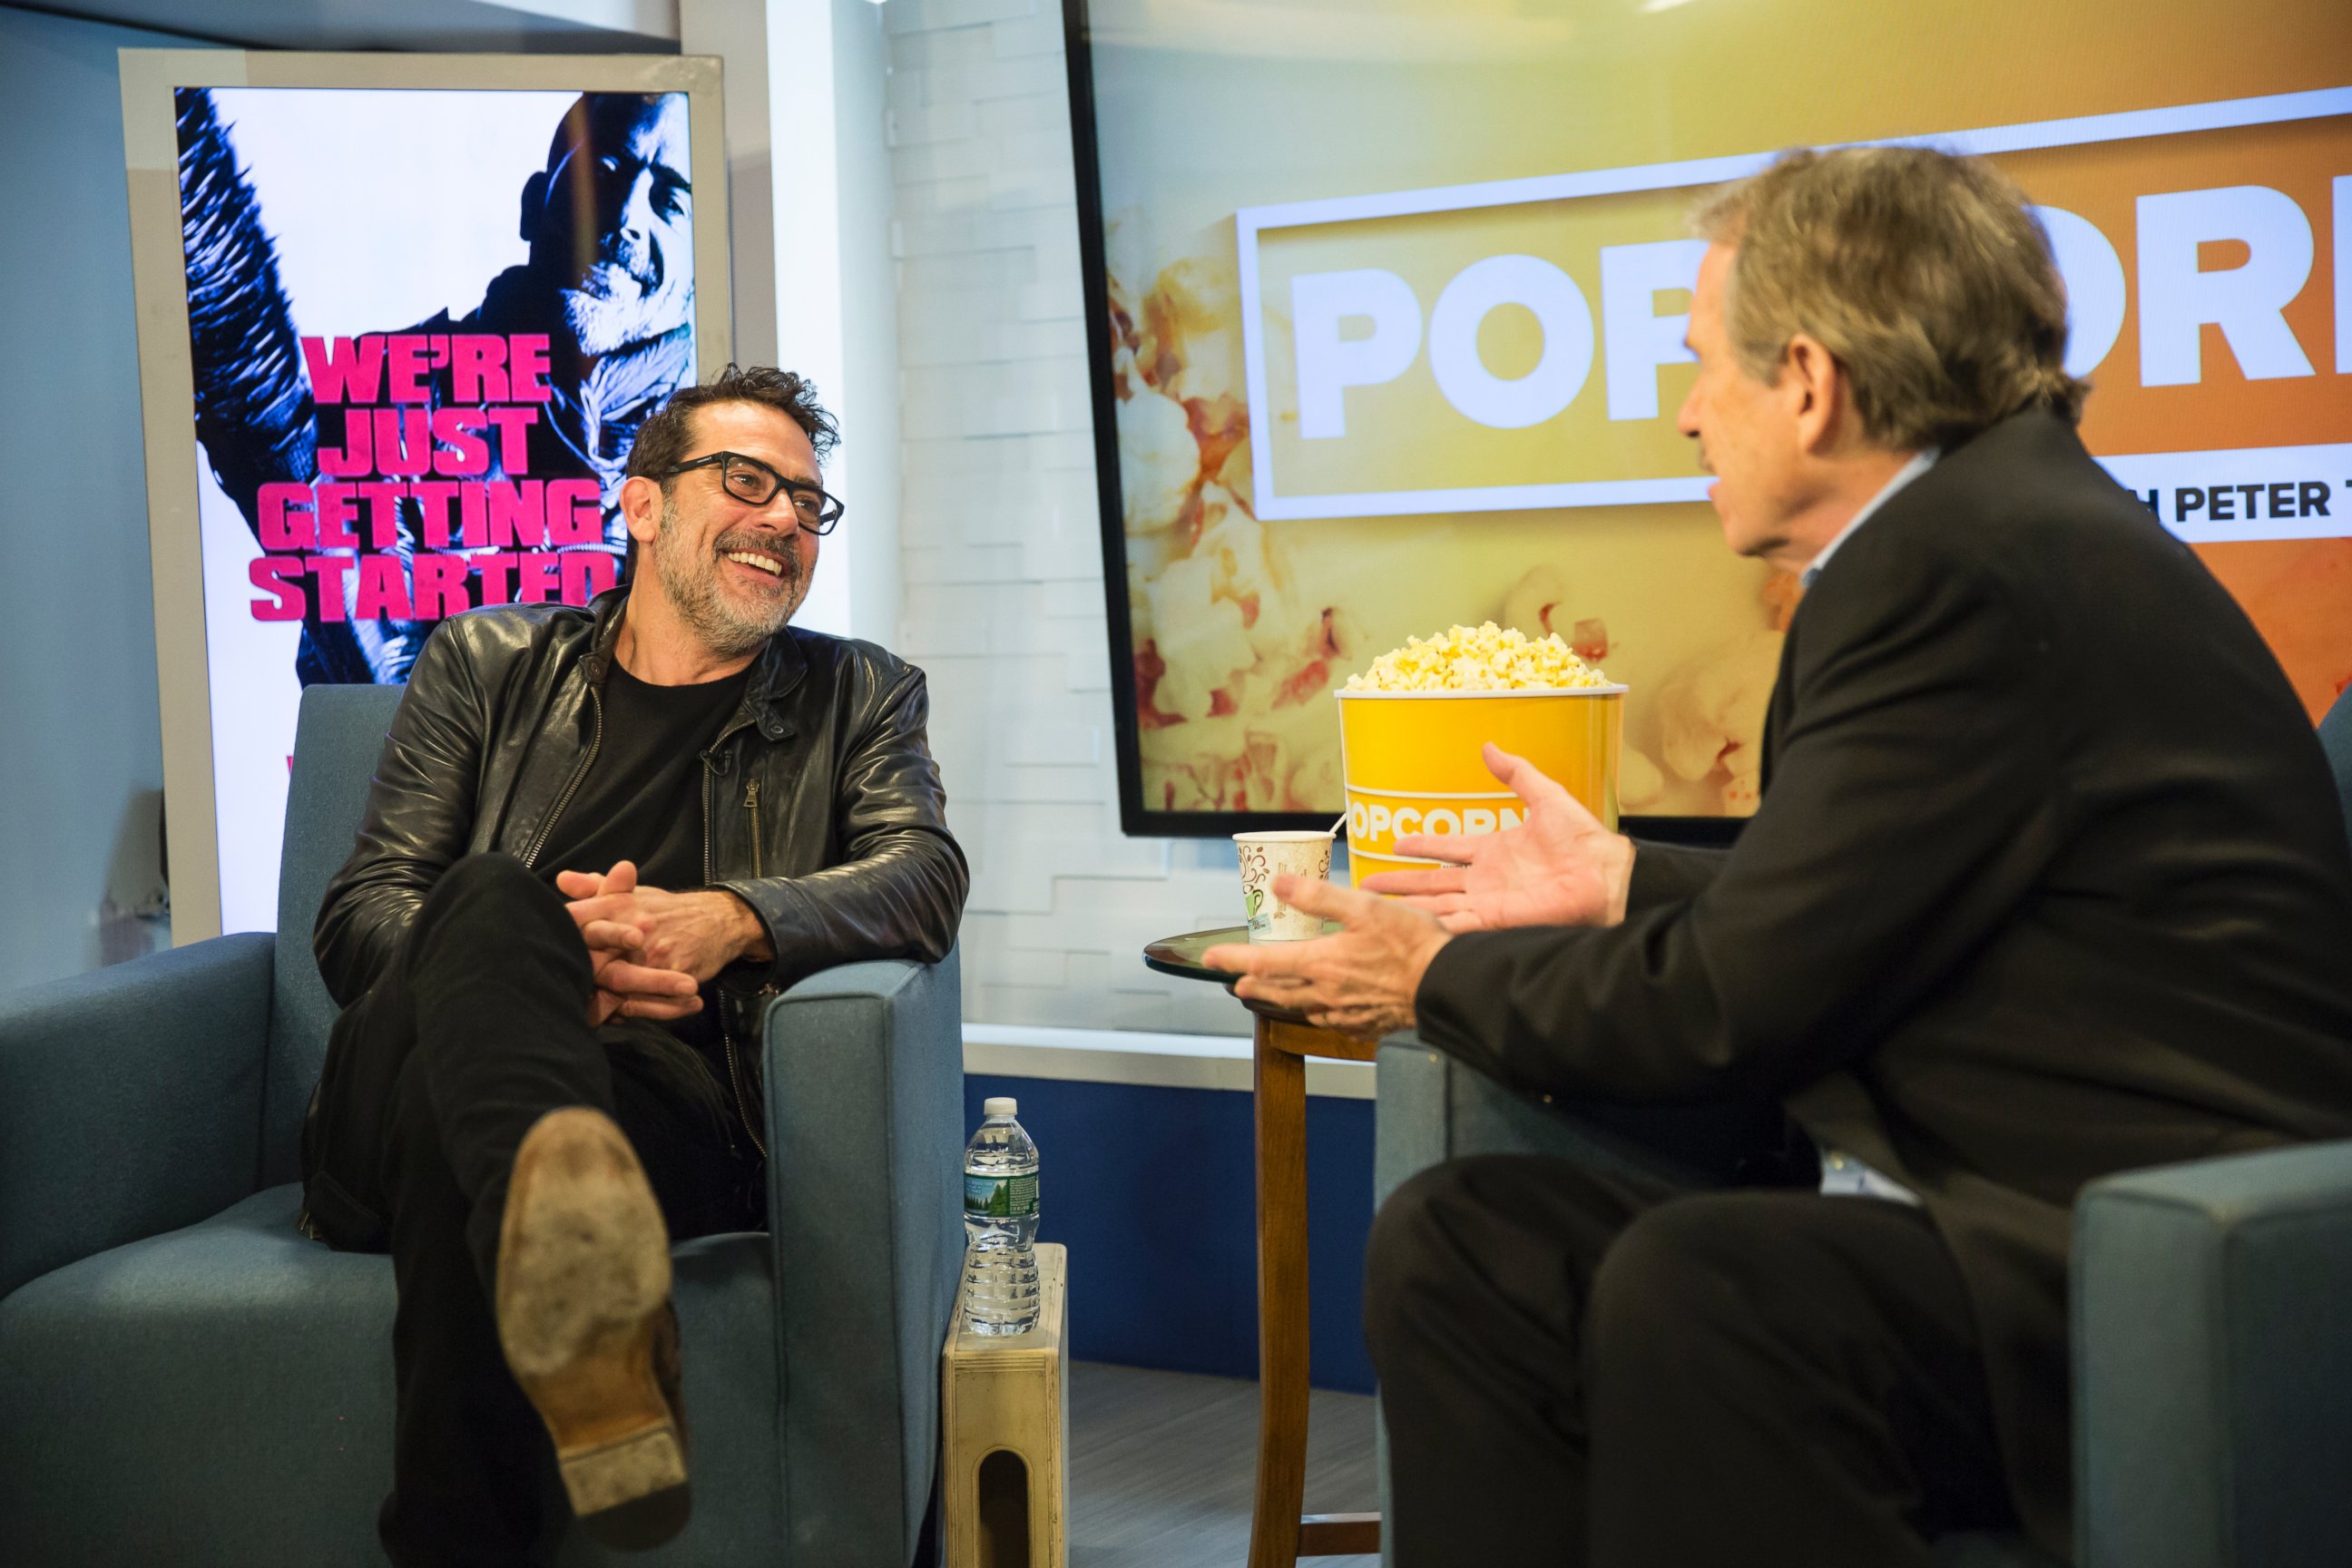 PHOTO: Jeffrey Dean Morgan appeared on "Popcorn with Peter Travers."